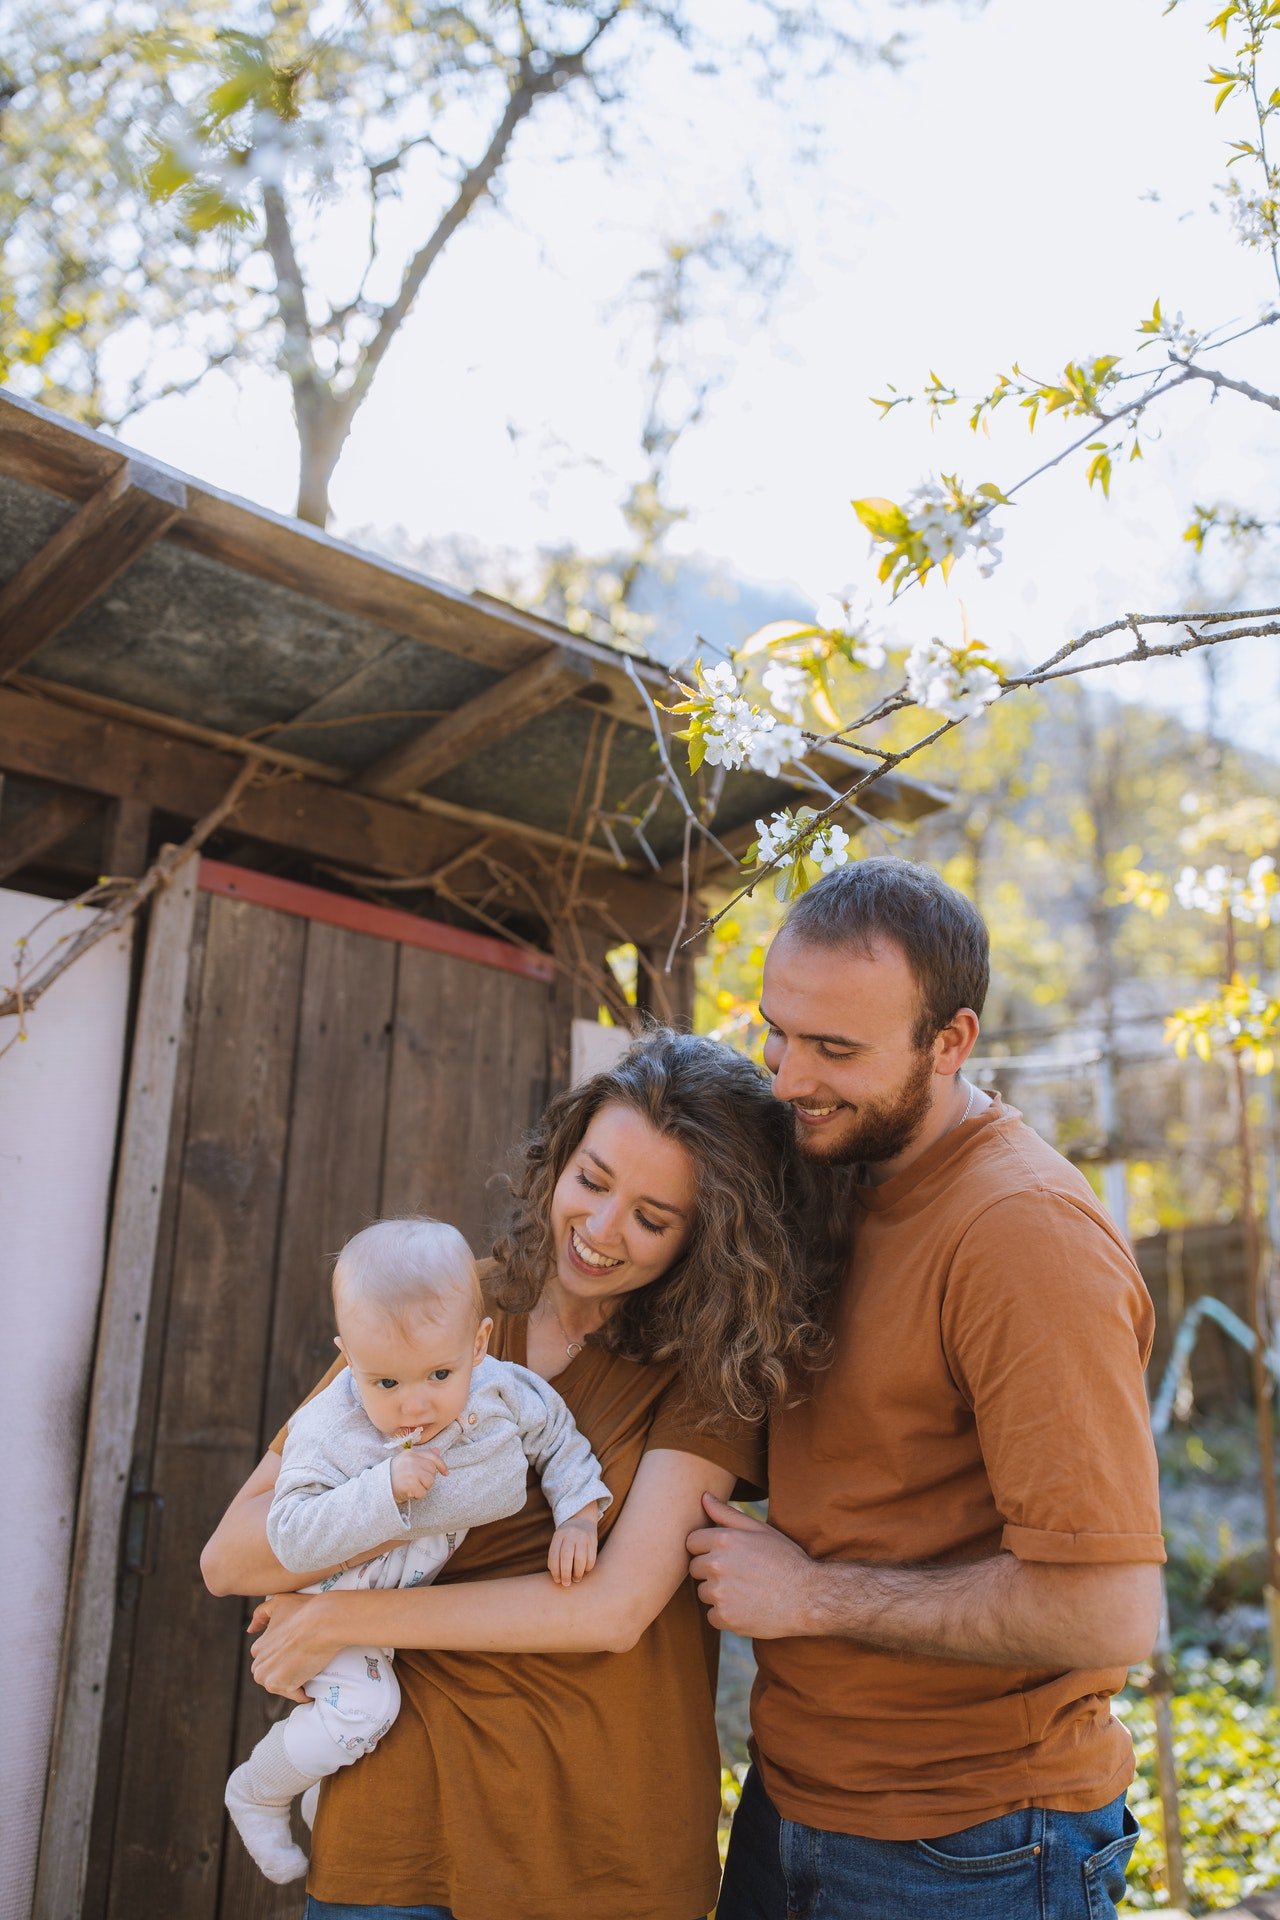 Happy parents with their infant child | Source: Pexels